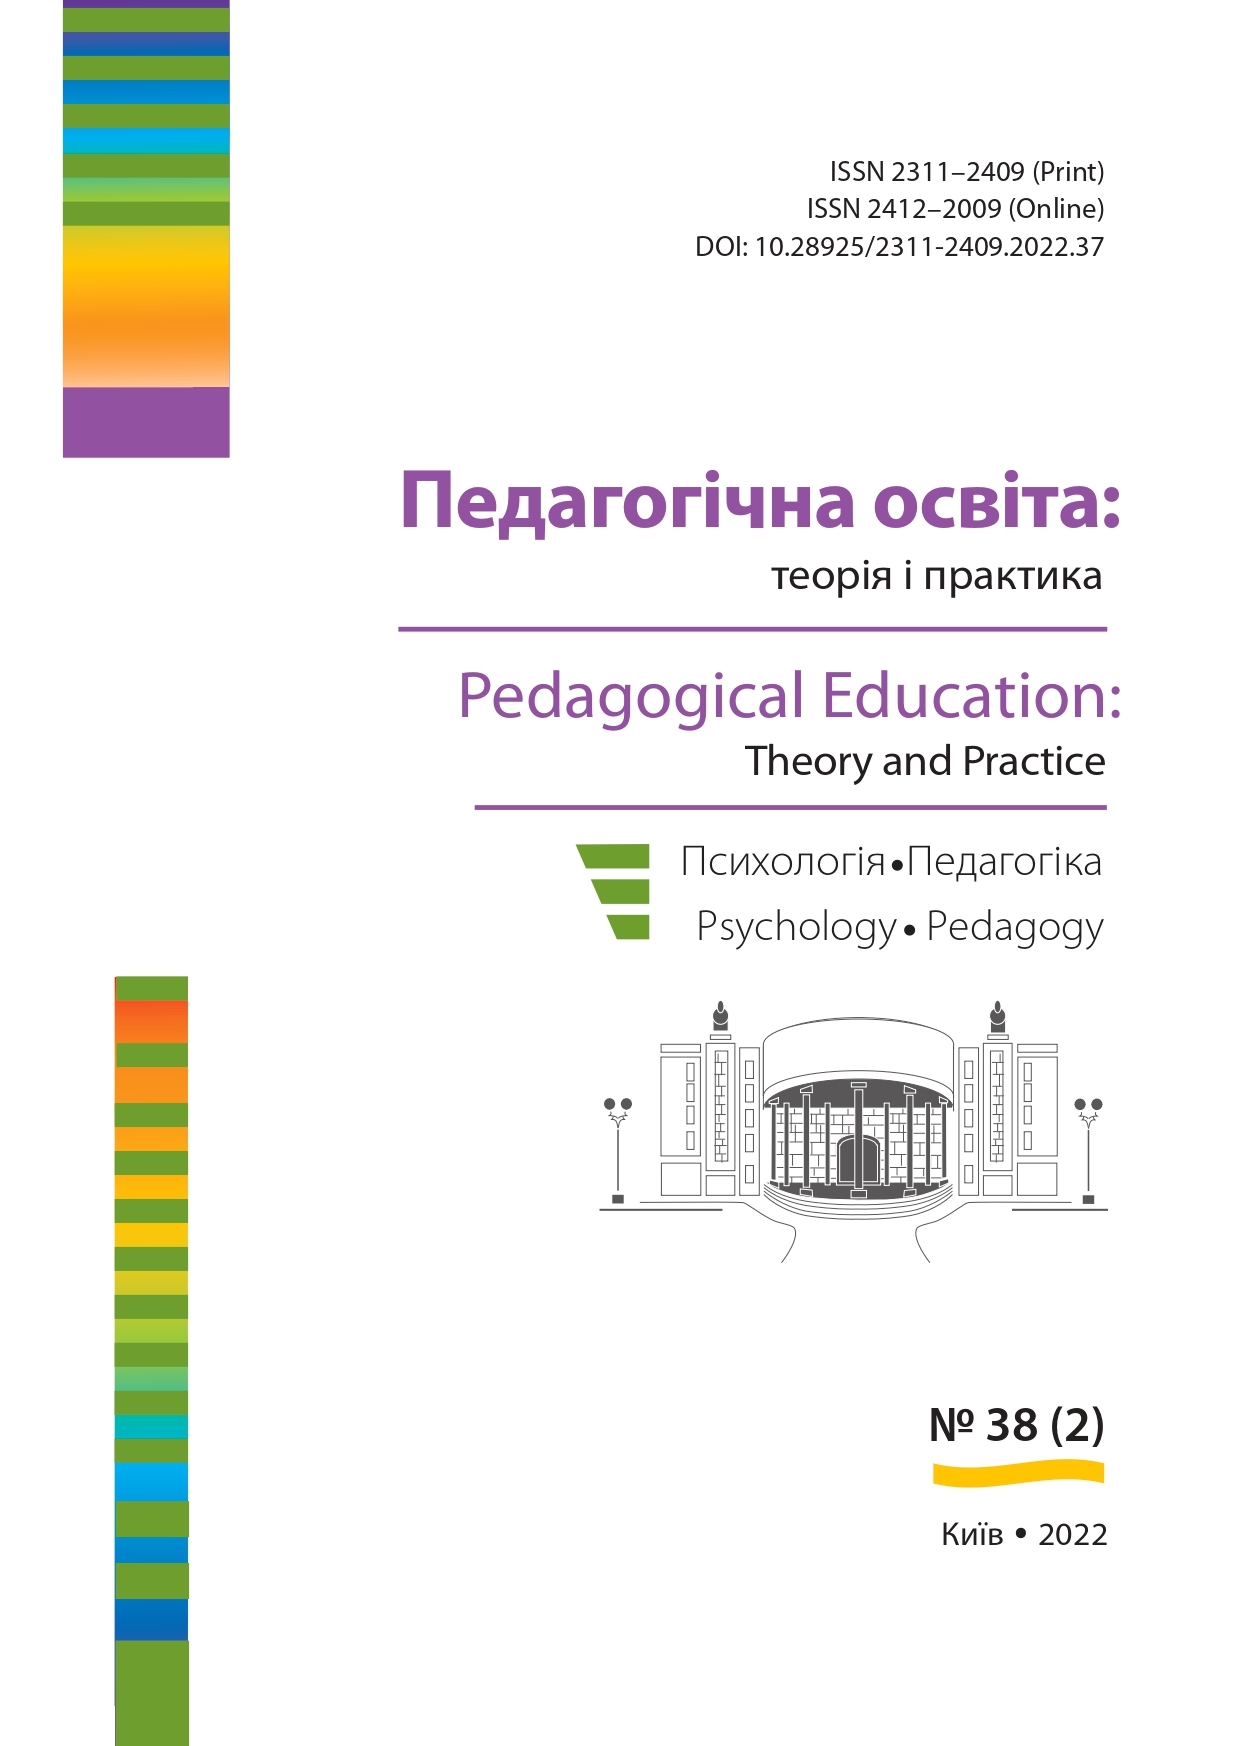 					View No. 38 (2) (2022): Pedagogіcal education: Theory and Practice. Psychology. Pedagogy.
				